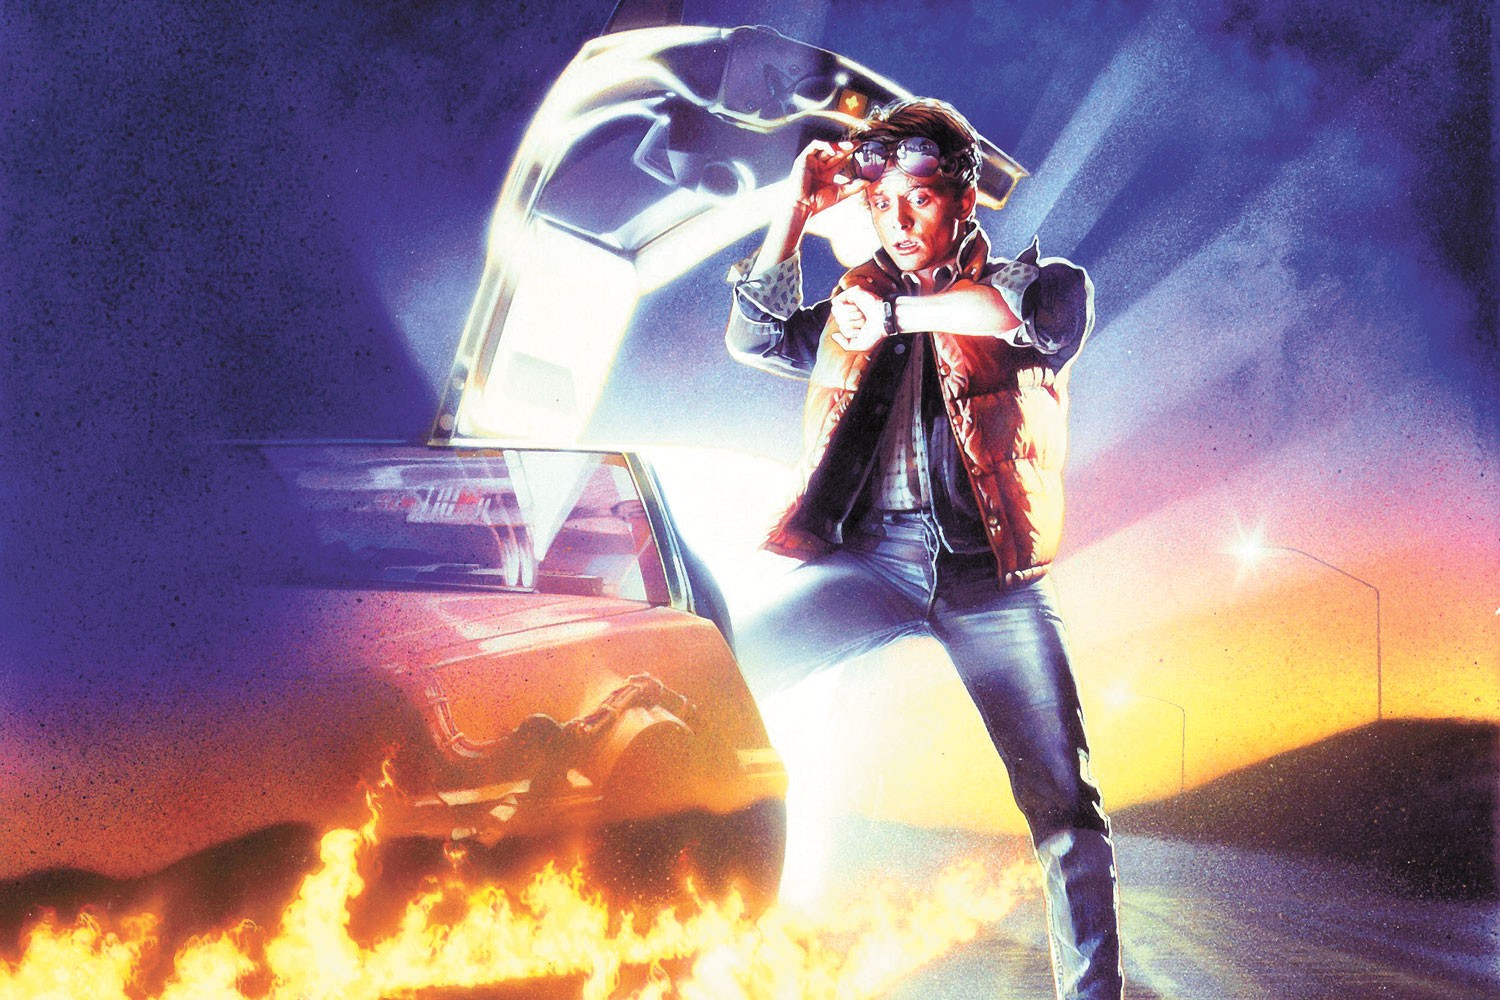 Thirty-five years since blasting into theaters, Back to the Future is still a timeless classic